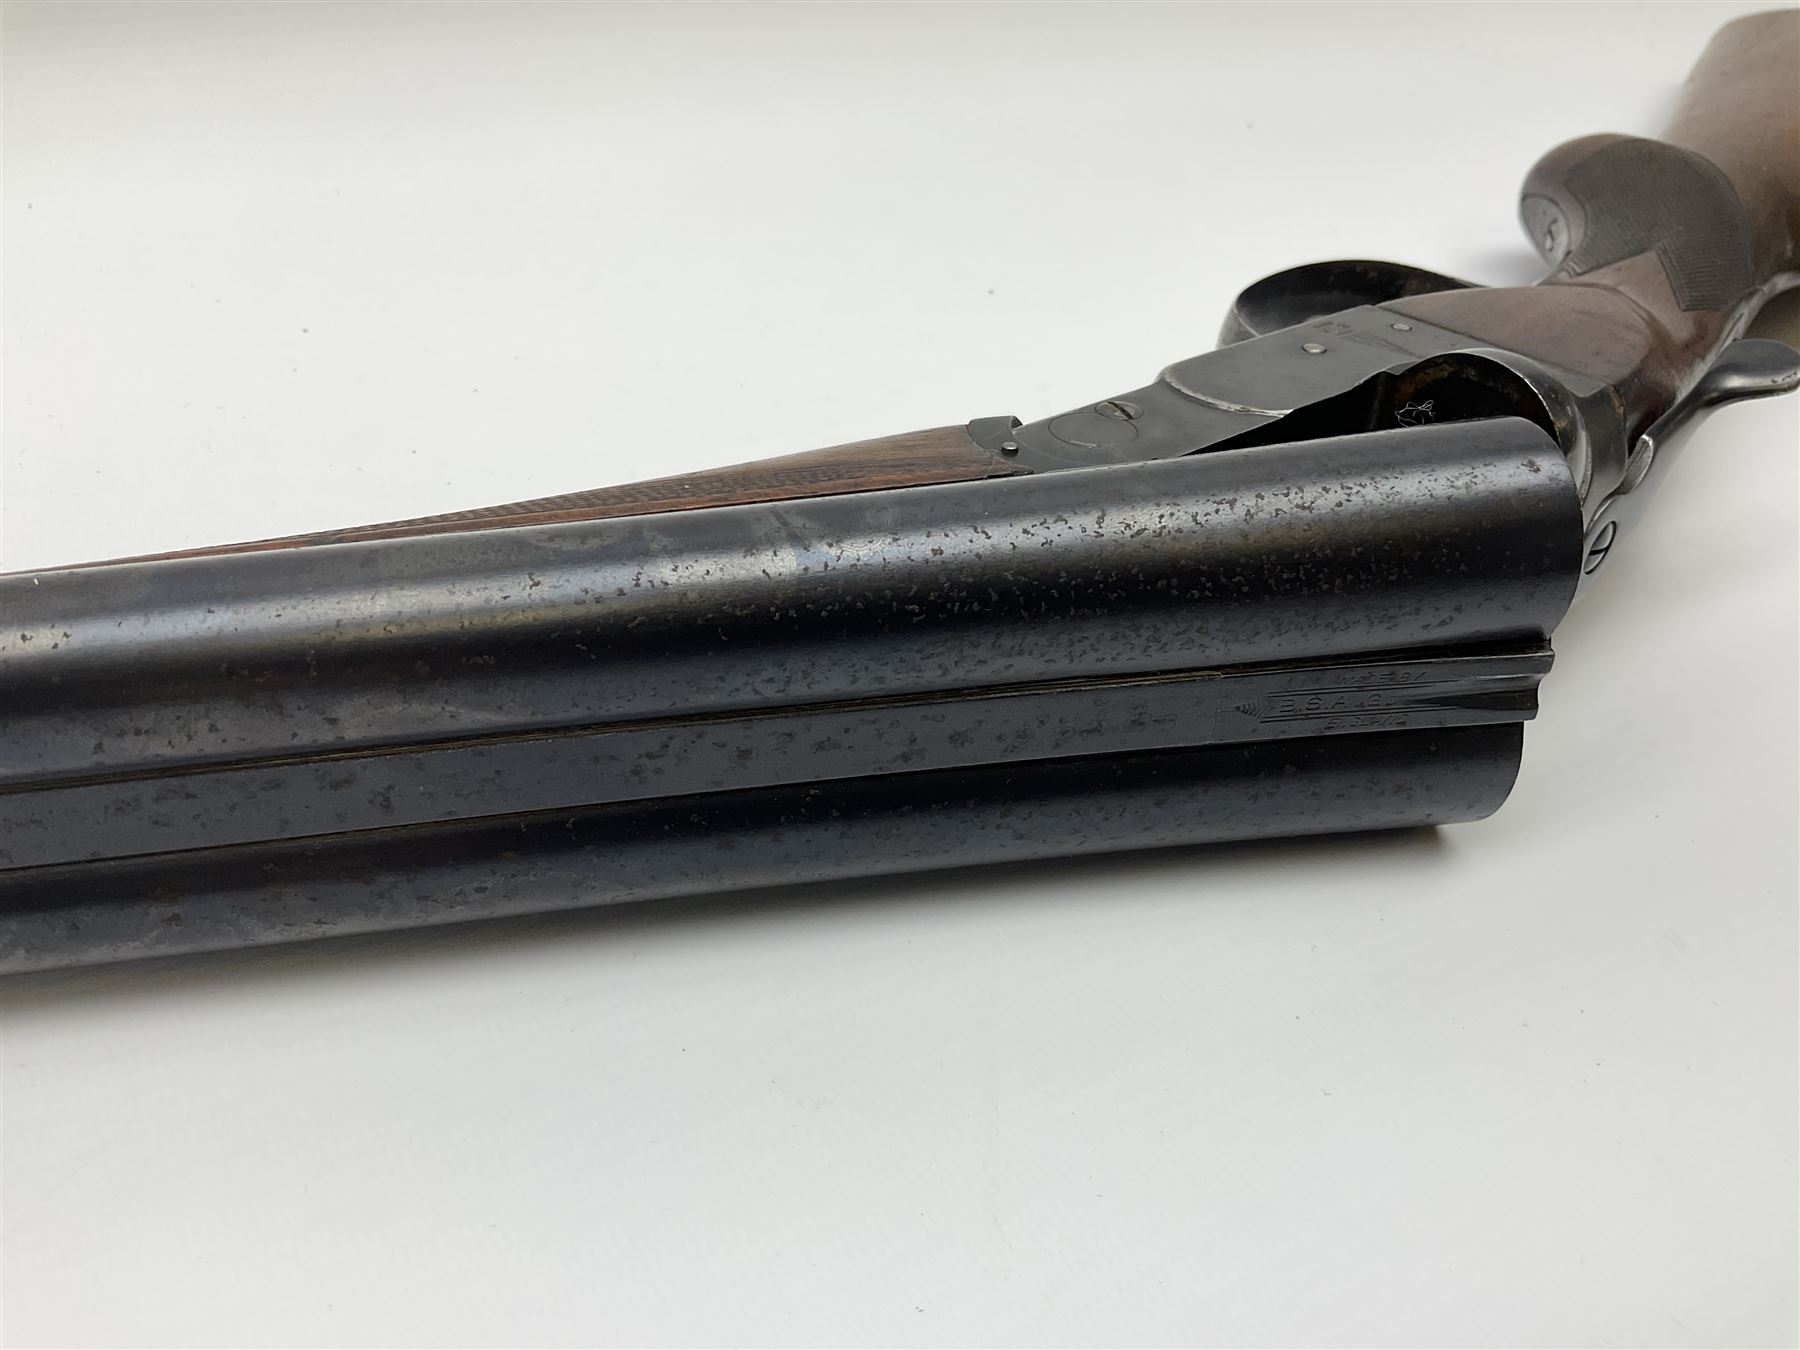 BSA 12-bore side-by-side double barrel box-lock ejector sporting gun with 76cm barrels - Image 10 of 12